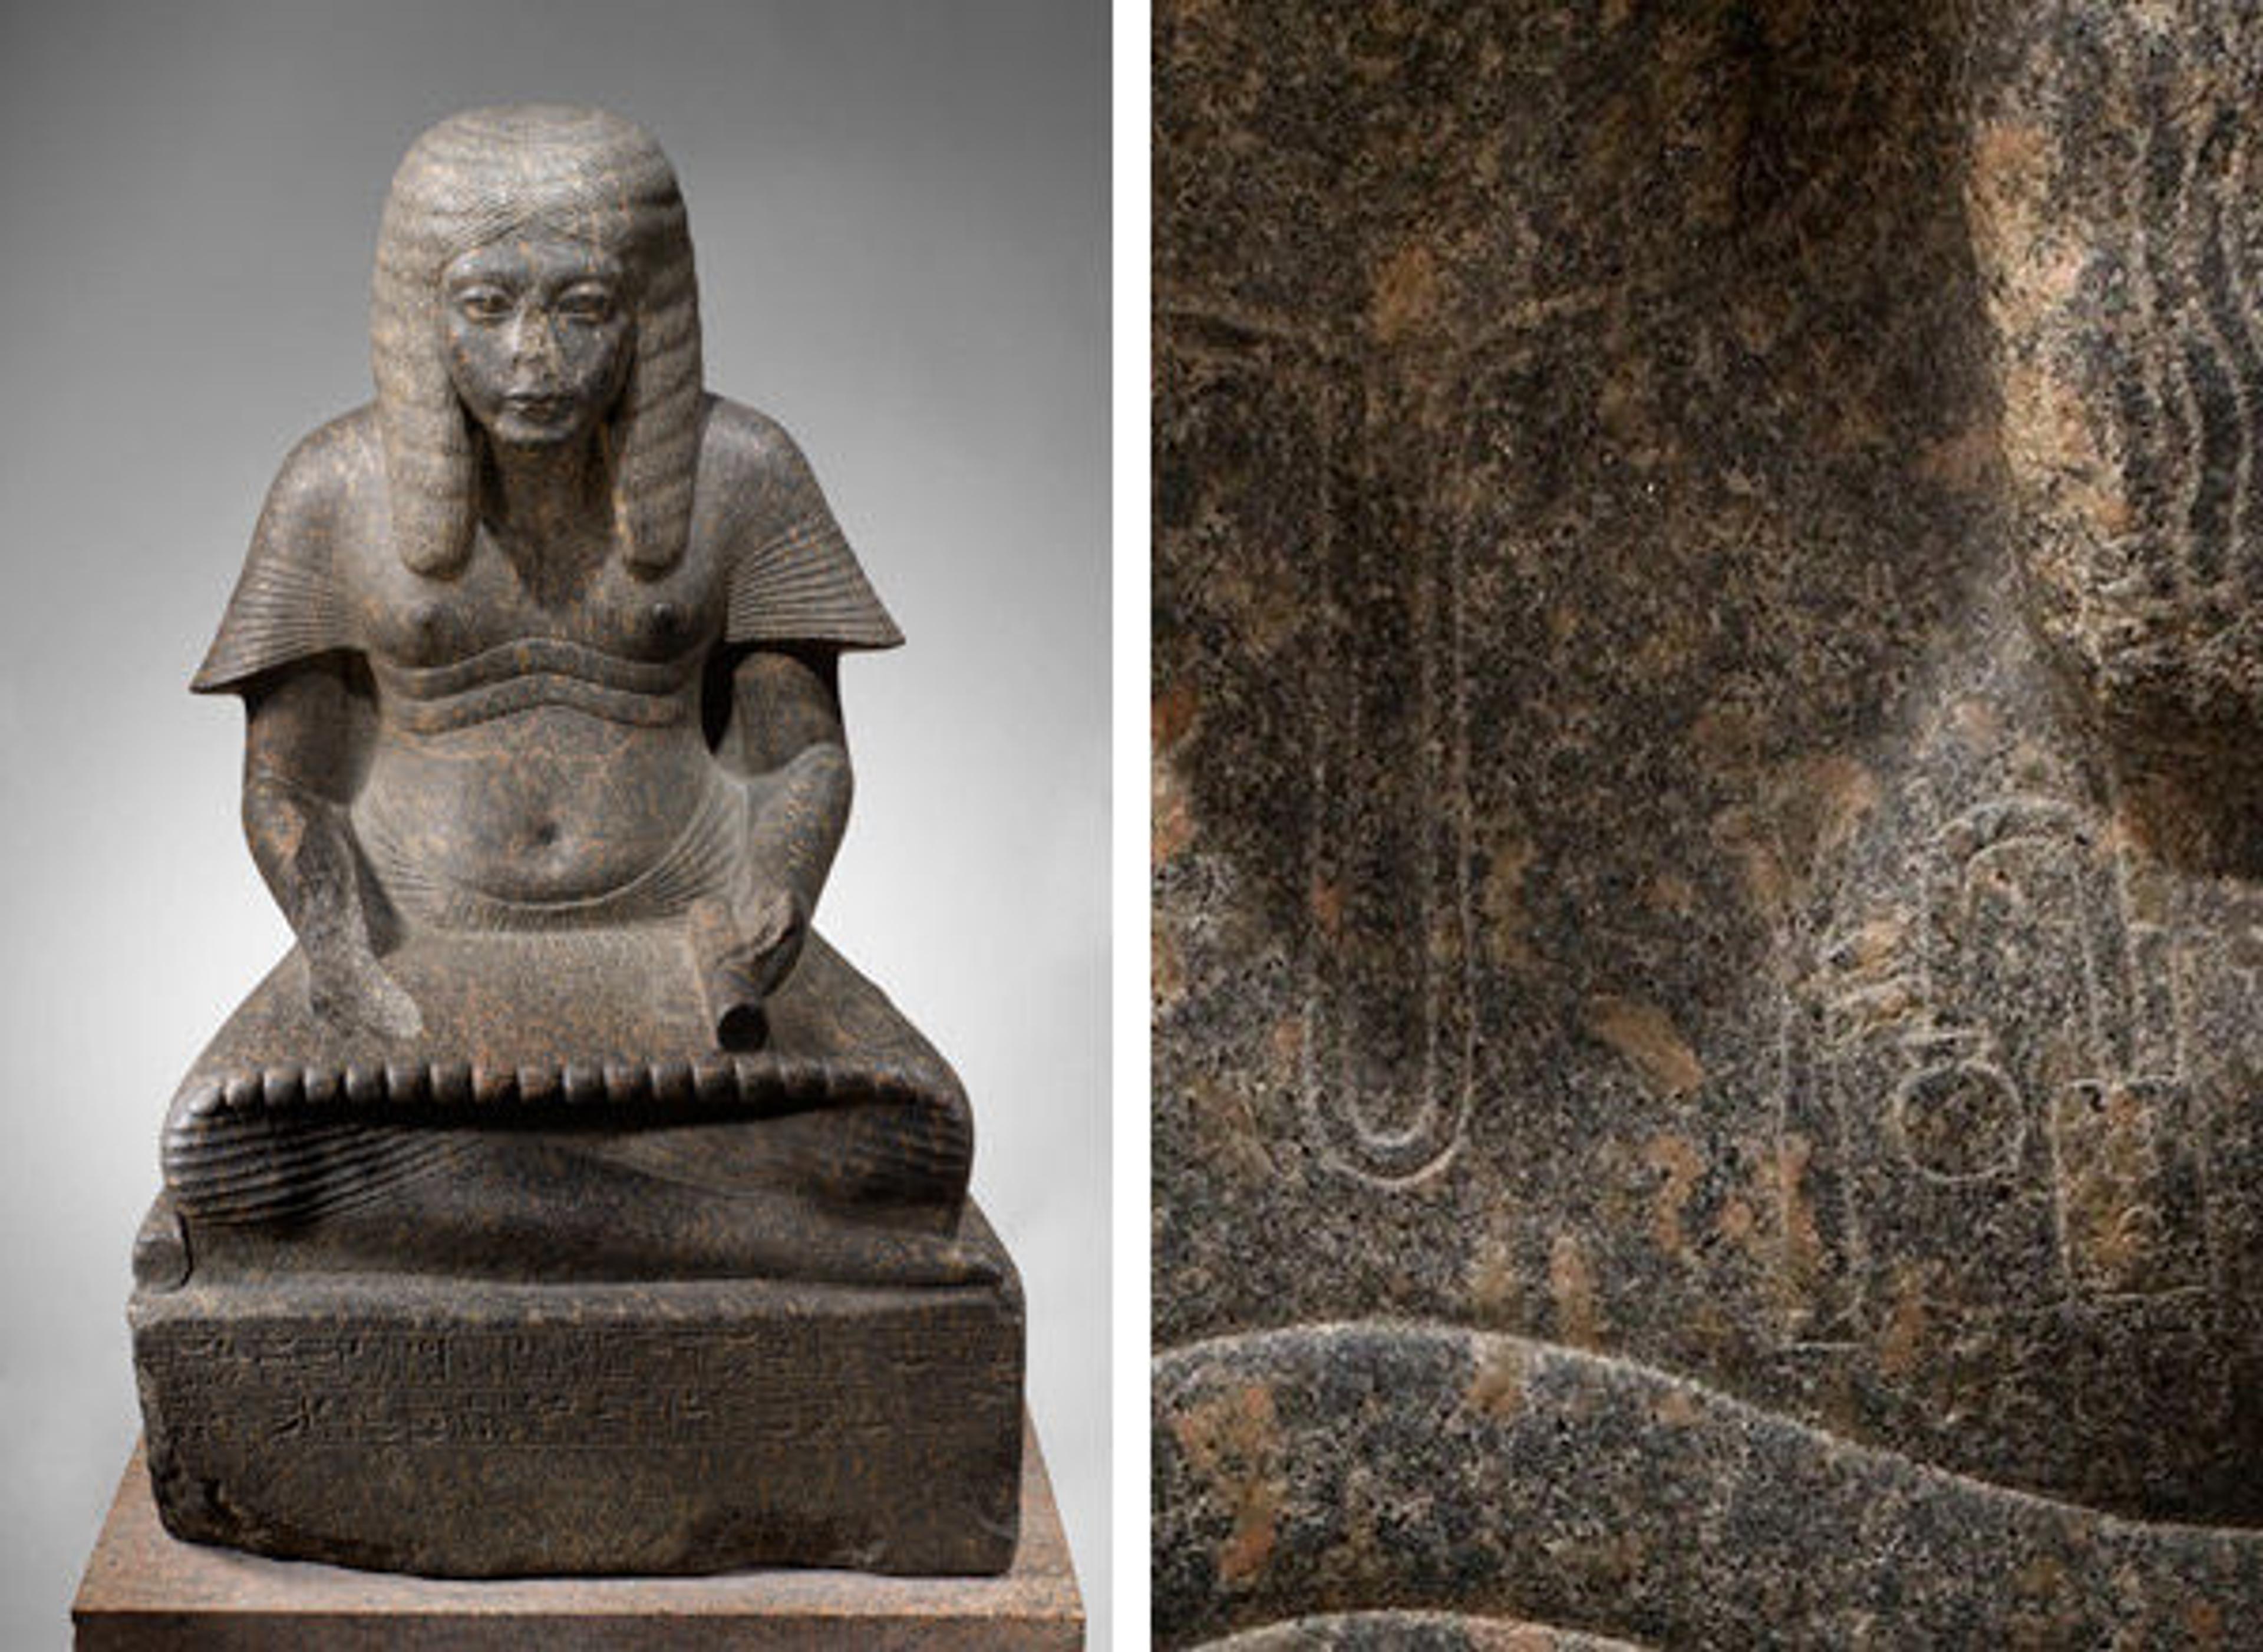 Left: Haremhab as a Scribe of the King. New Kingdom, Dynasty 18, reign of Tutankhamun or Aya (ca. 1336–1323 B.C.). Granodiorite; H. 113 cm (44 1/2 in.), W. 71 cm (27 15/16 in.), D. 55.5 cm (21 7/8 in.). The Metropolitan Museum of Art, New York, Gift of Mr. and Mrs. V. Everit Macy, 1923 (23.10.1). Right: Detail view of base, showing "scribe" hieroglyph